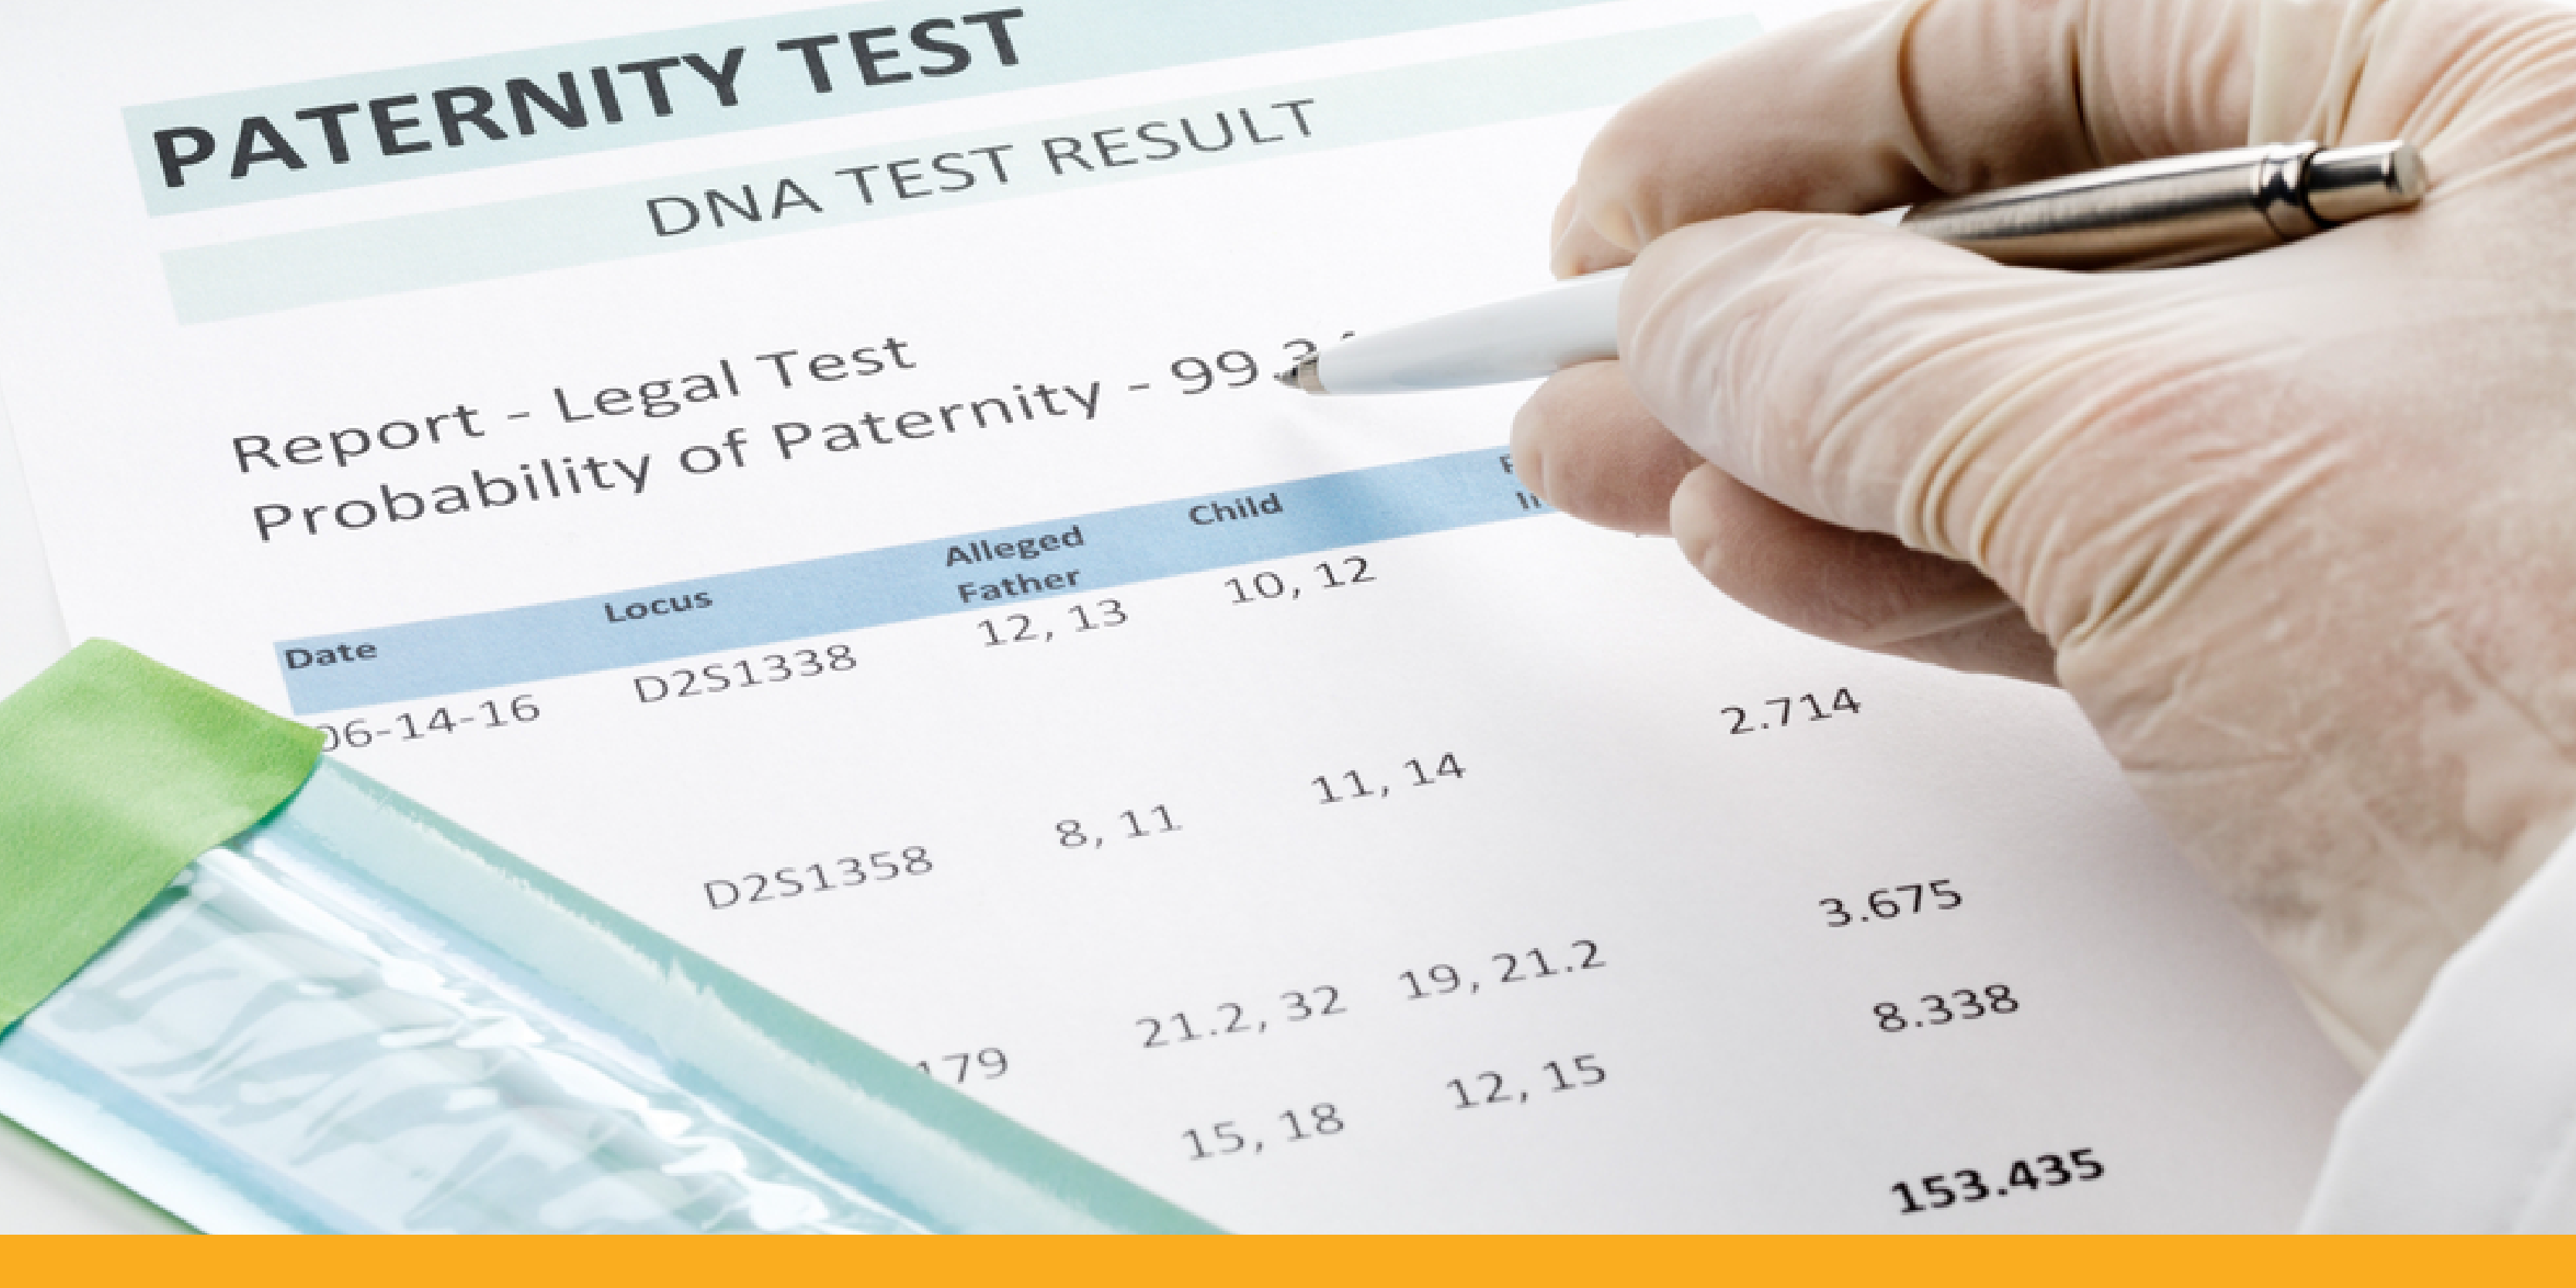 Example of paternity test results